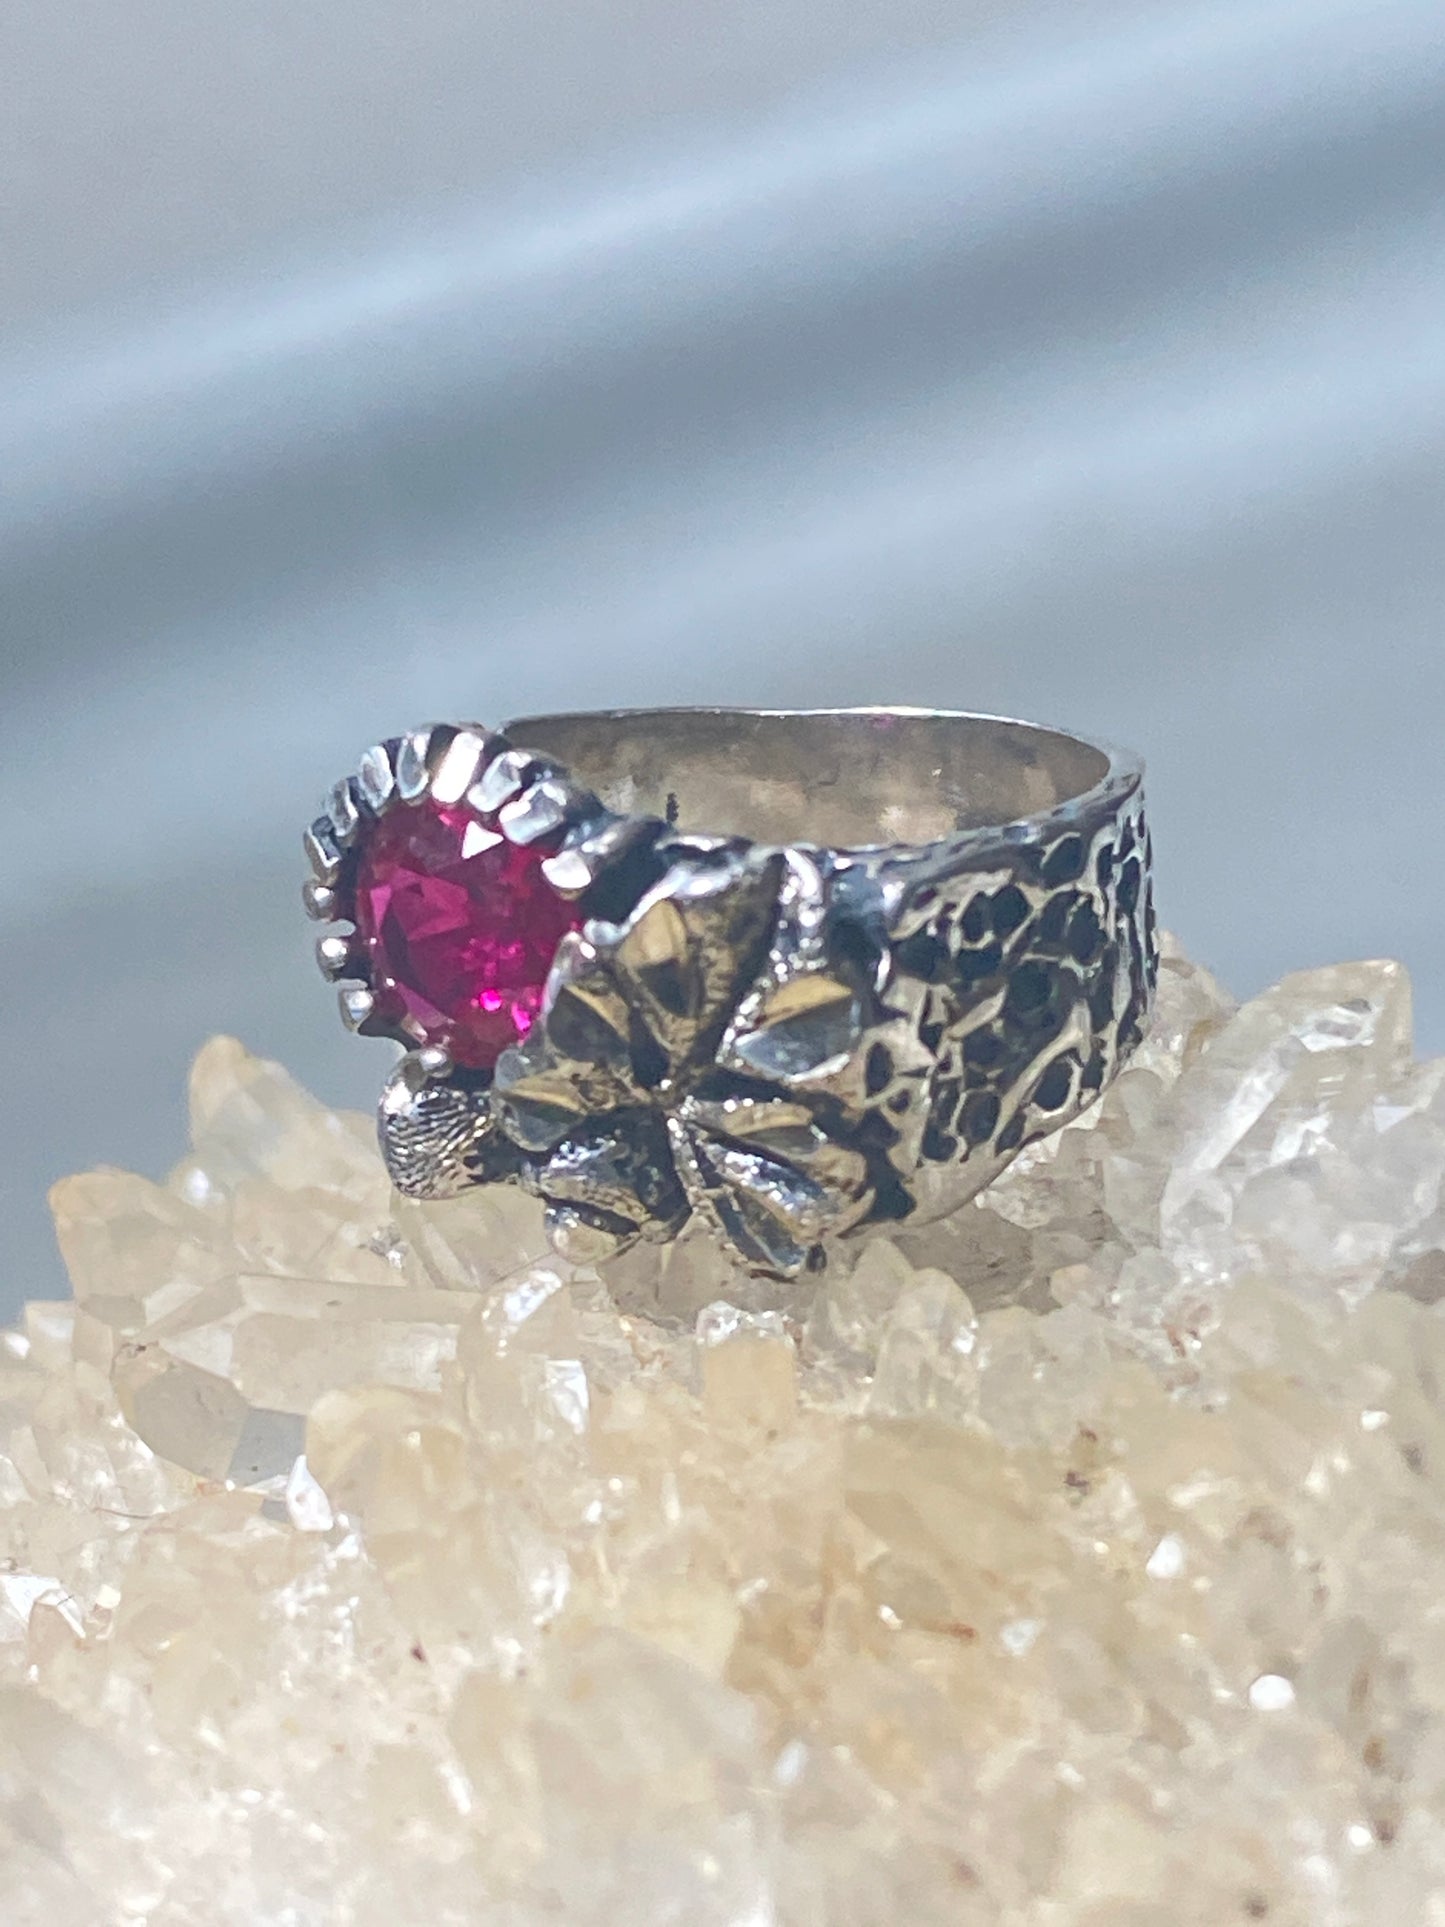 Flower ring size 4.75 floral cocktail pinky band silver women girls